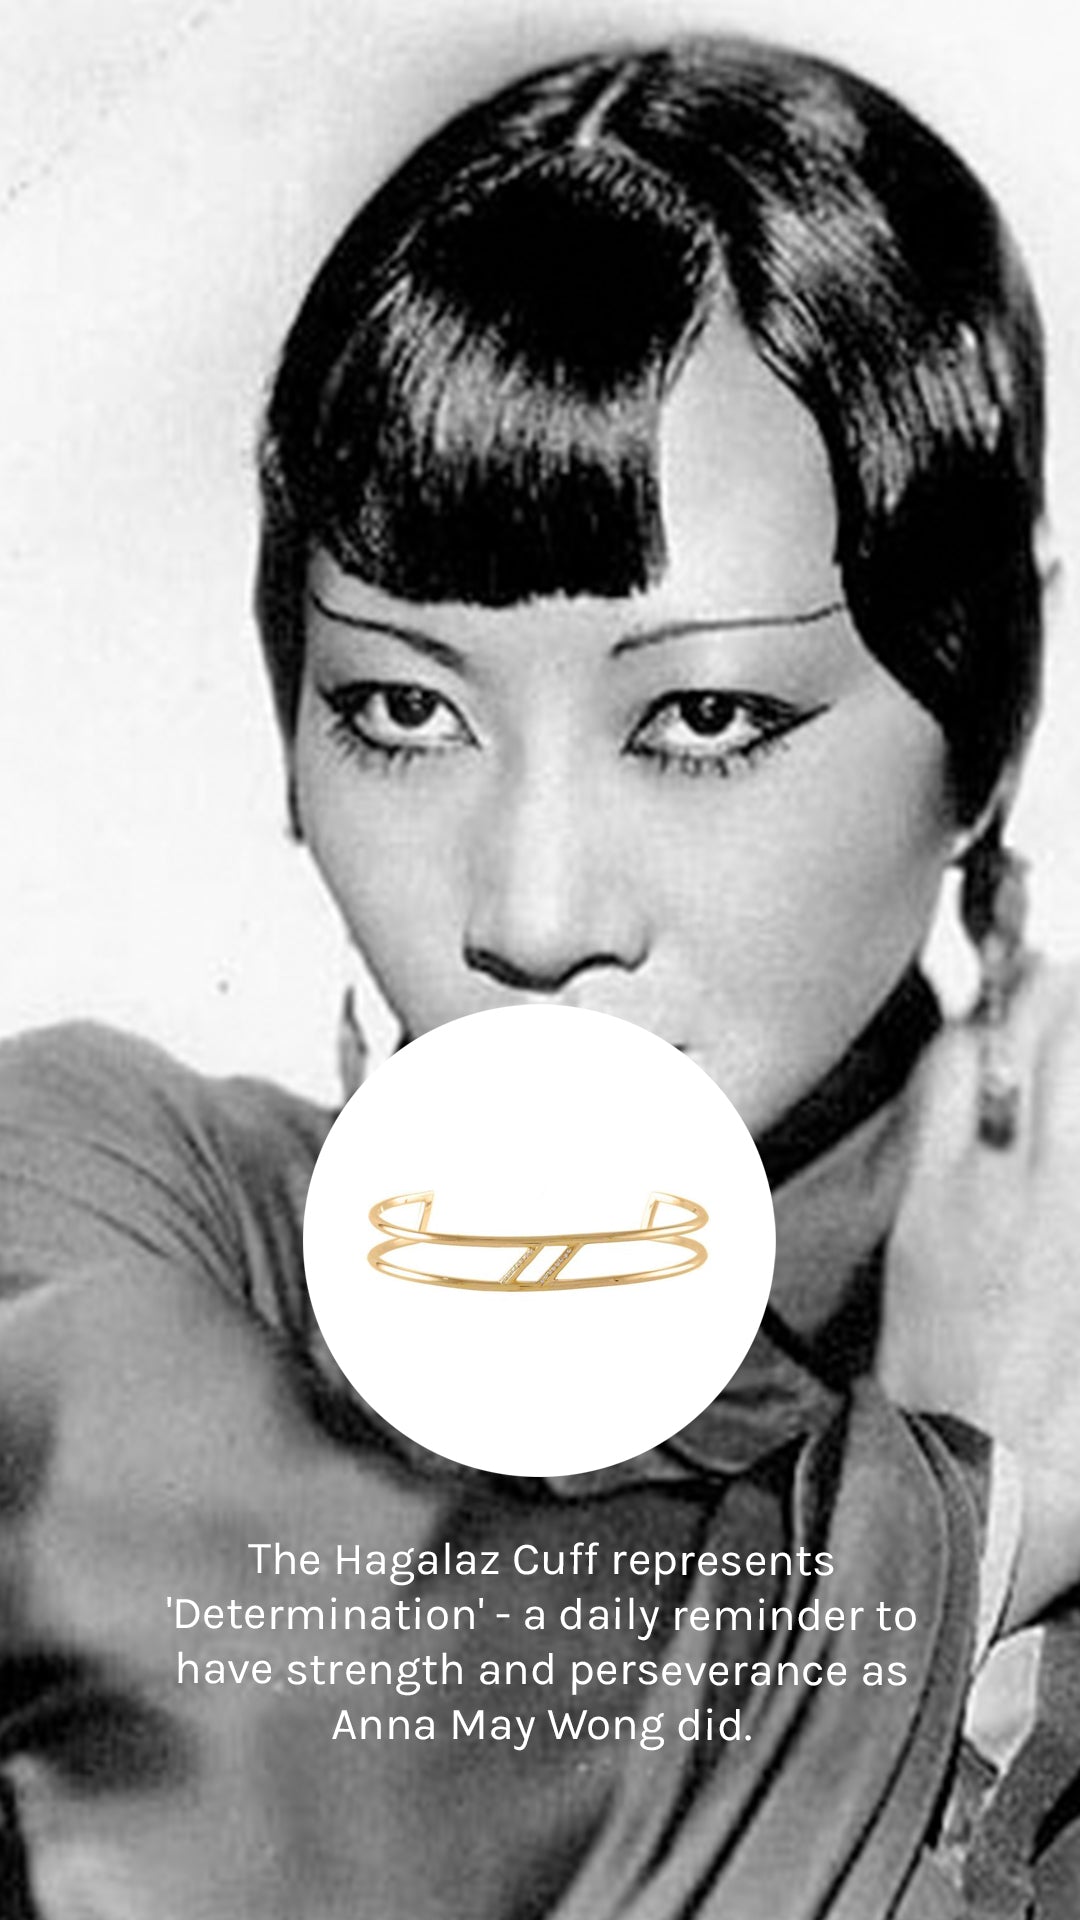 Anna May Wong with her striking style.